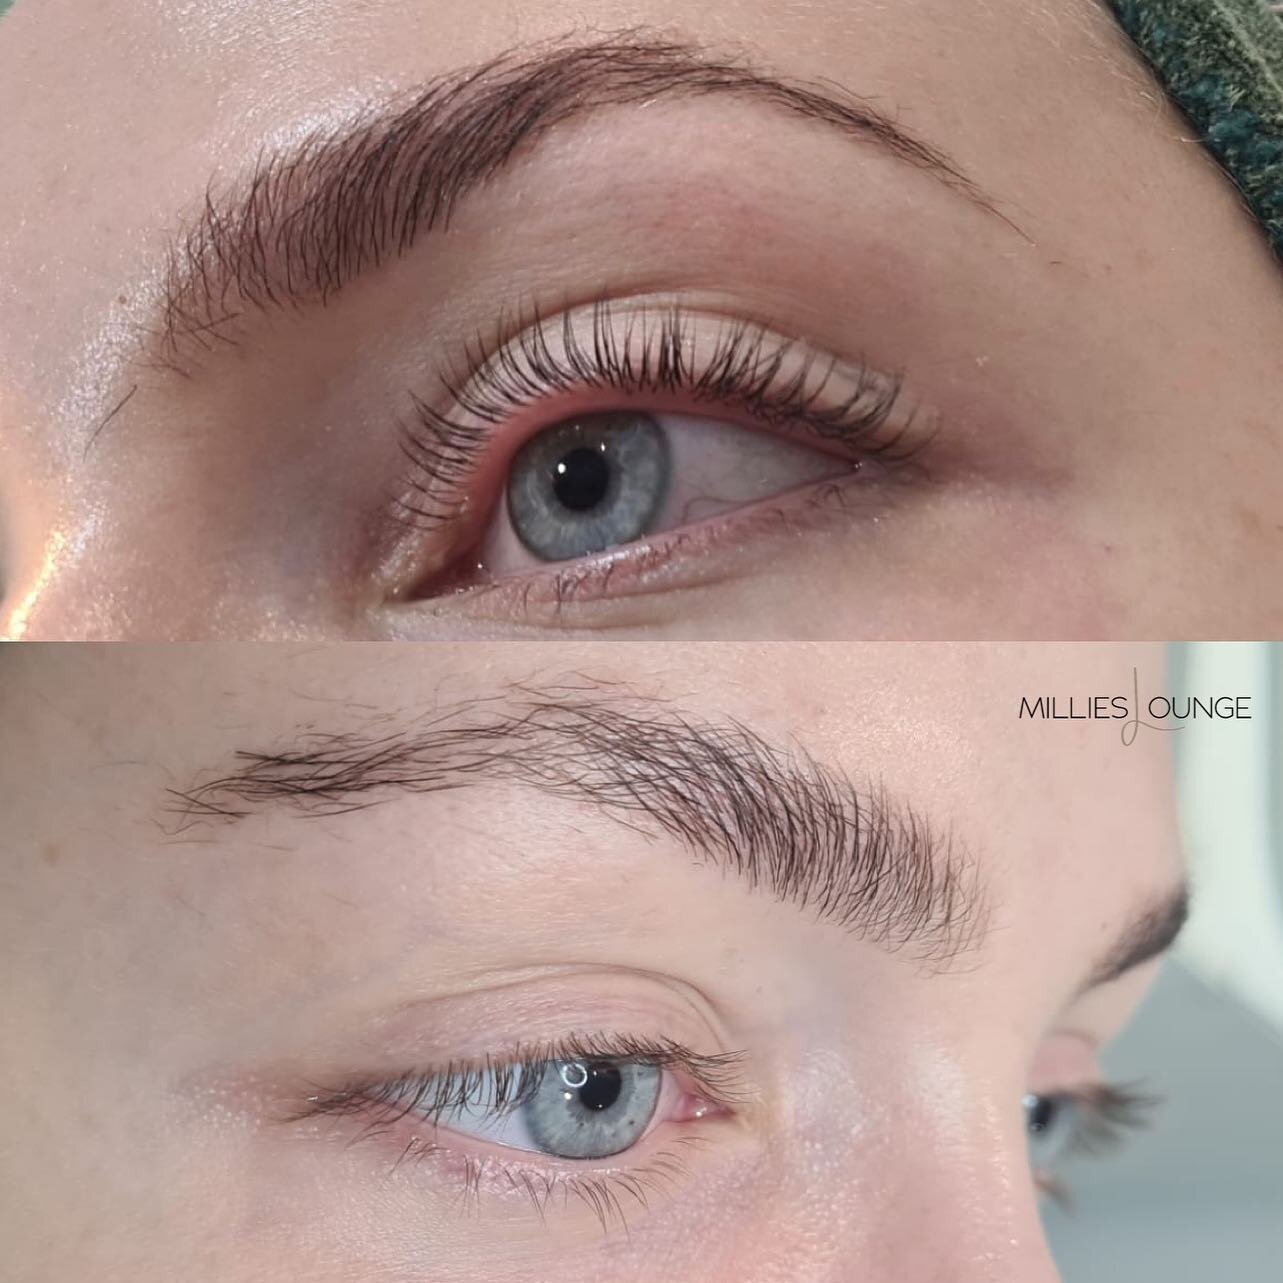 Another beautiful LVL Lash Lift Treatment by our Millies Lounge team 🥰

Want to enhance your lashes? Only &pound;&pound;55.80 (down from &pound;62!)

Or enjoy as apart of our Self-Care package :

LVL Lash Lift with Brow Shaping (Includes Lash Tint, 